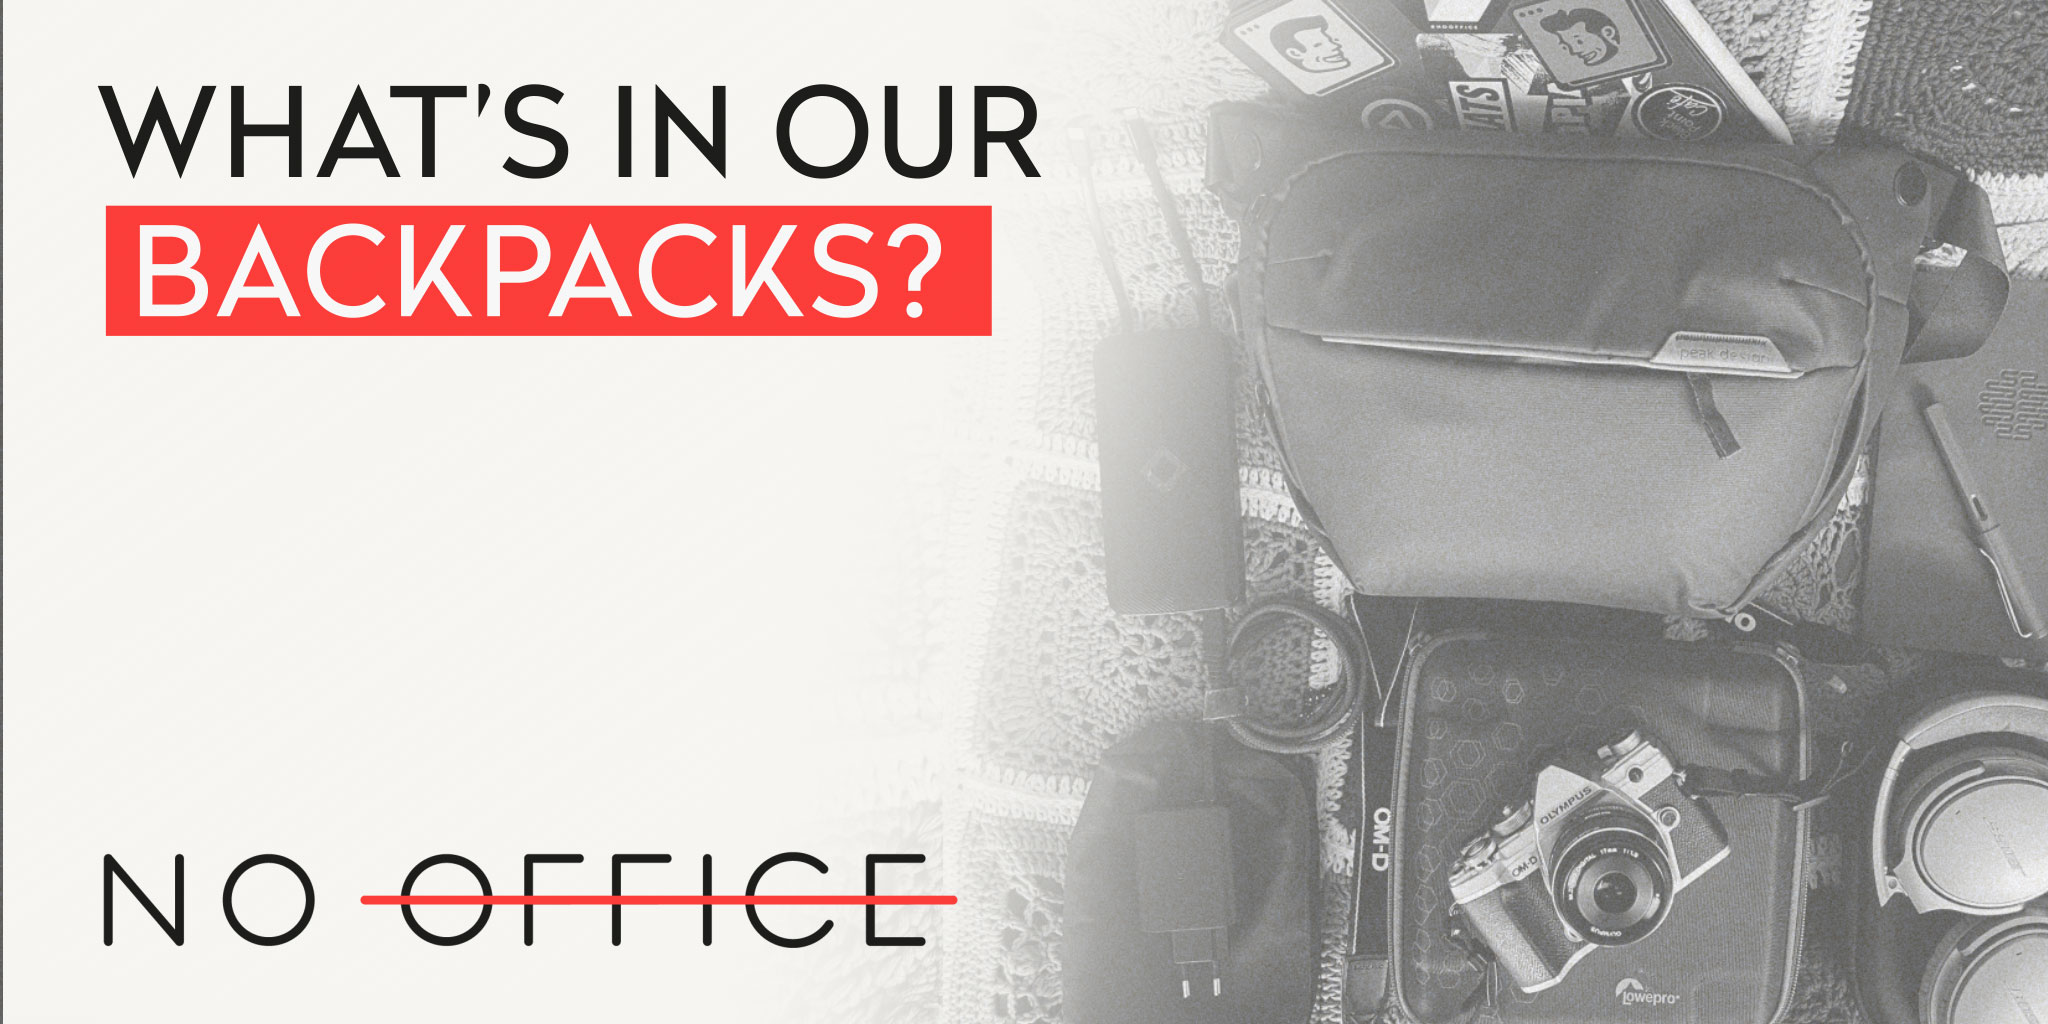 What’s in our backpacks? - The No Office Podcast - remote work and dispersed team management